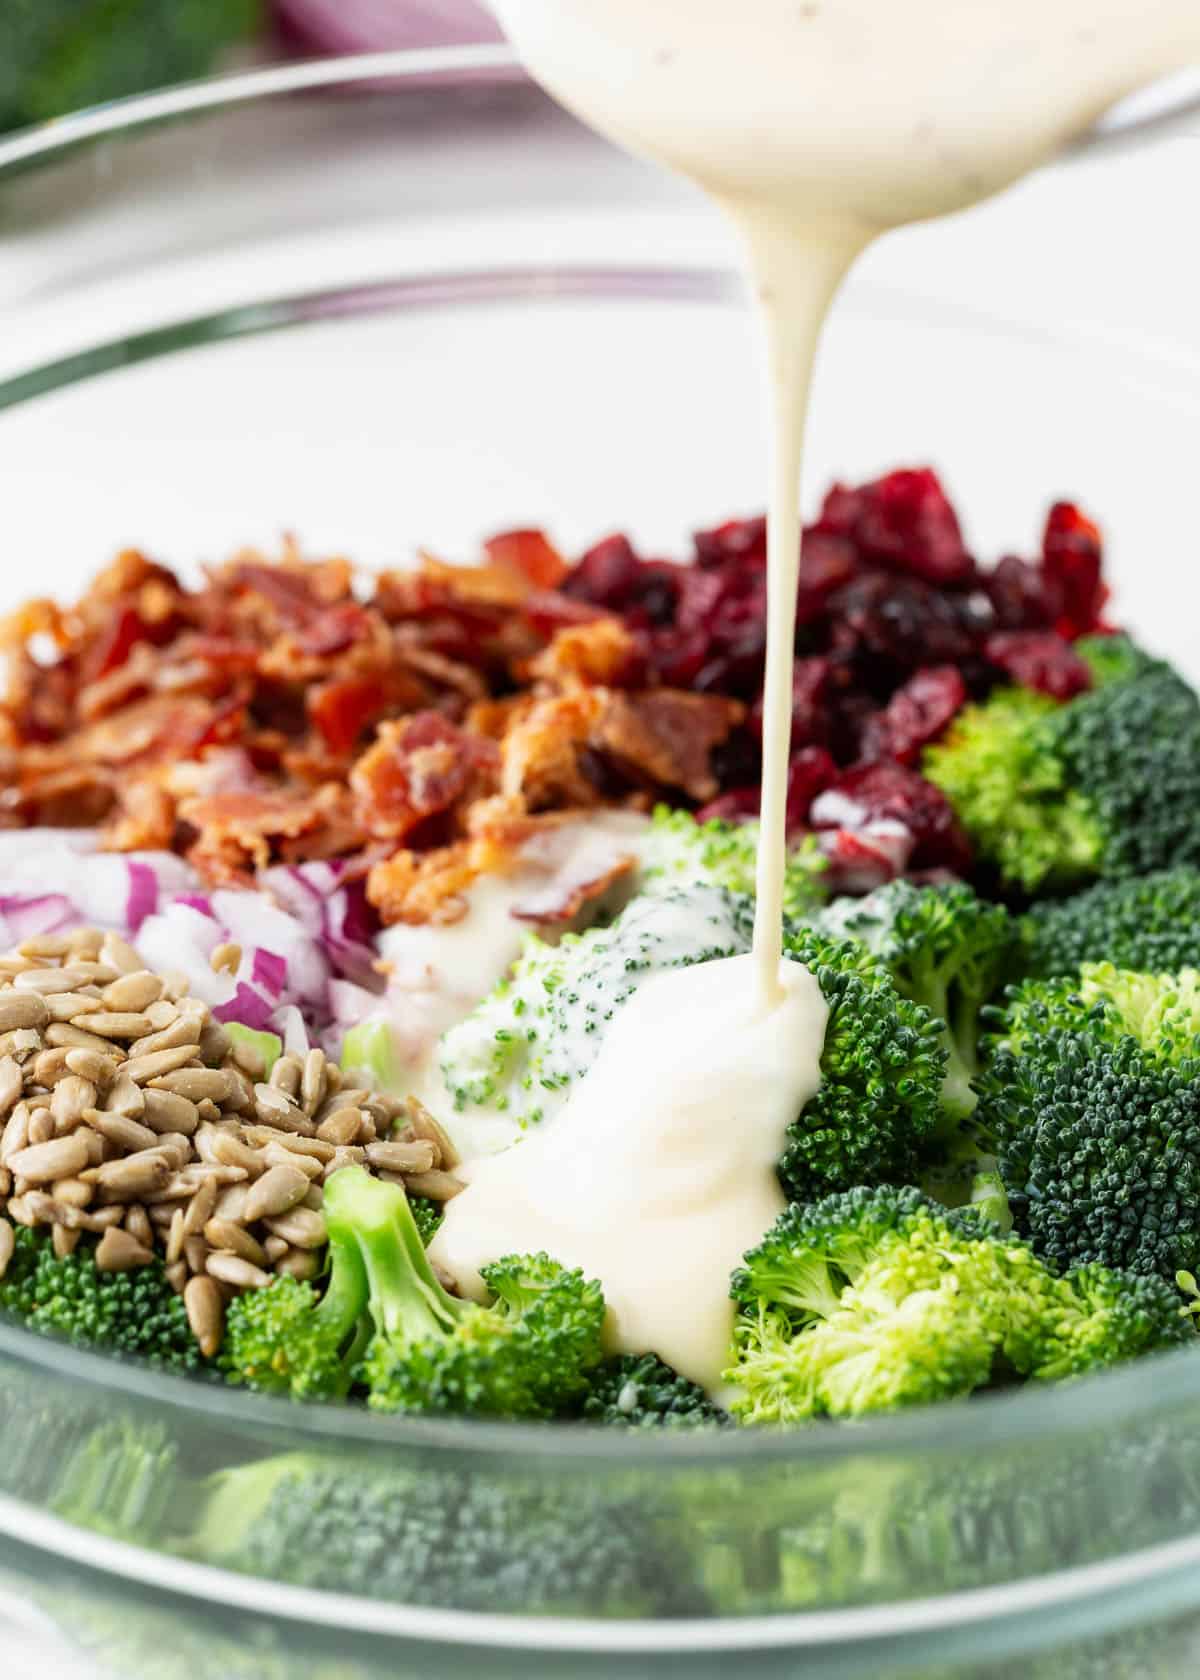 Pouring dressing over broccoli salad with bacon.